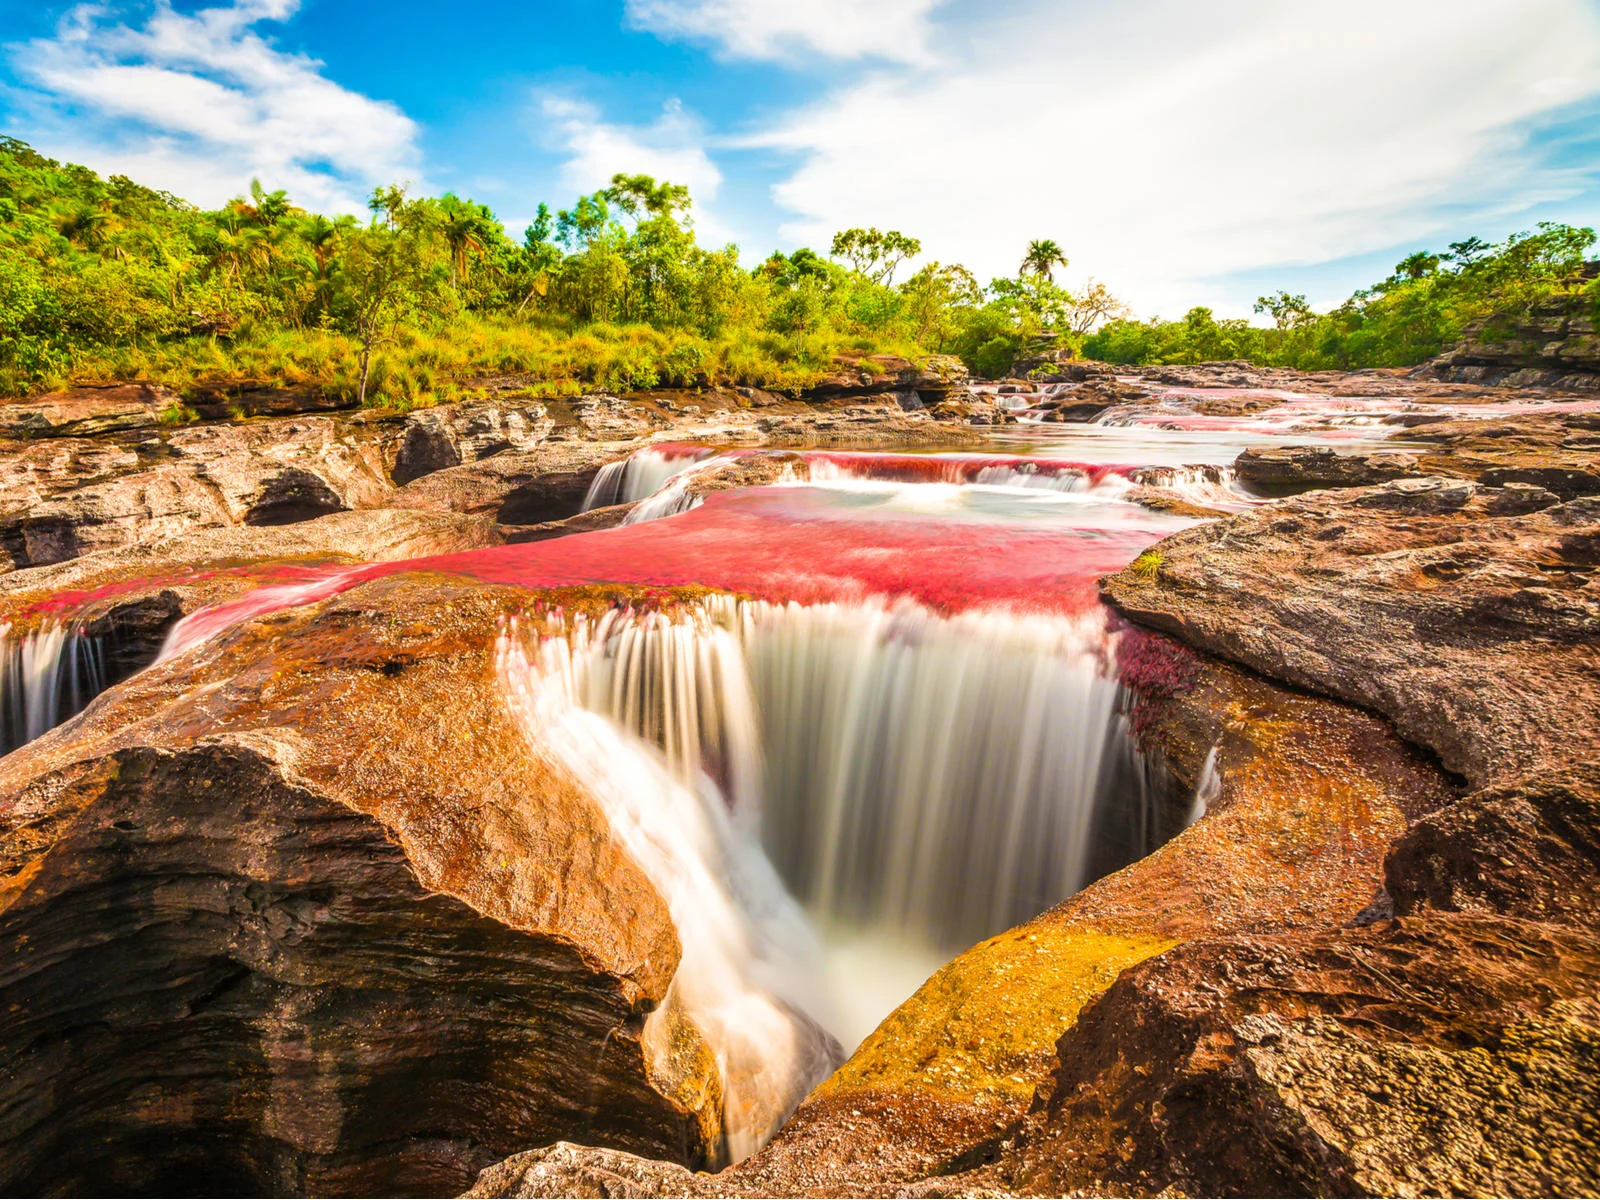 Cano Cristales multi-colored river pictured during the worst time to visit Colombia